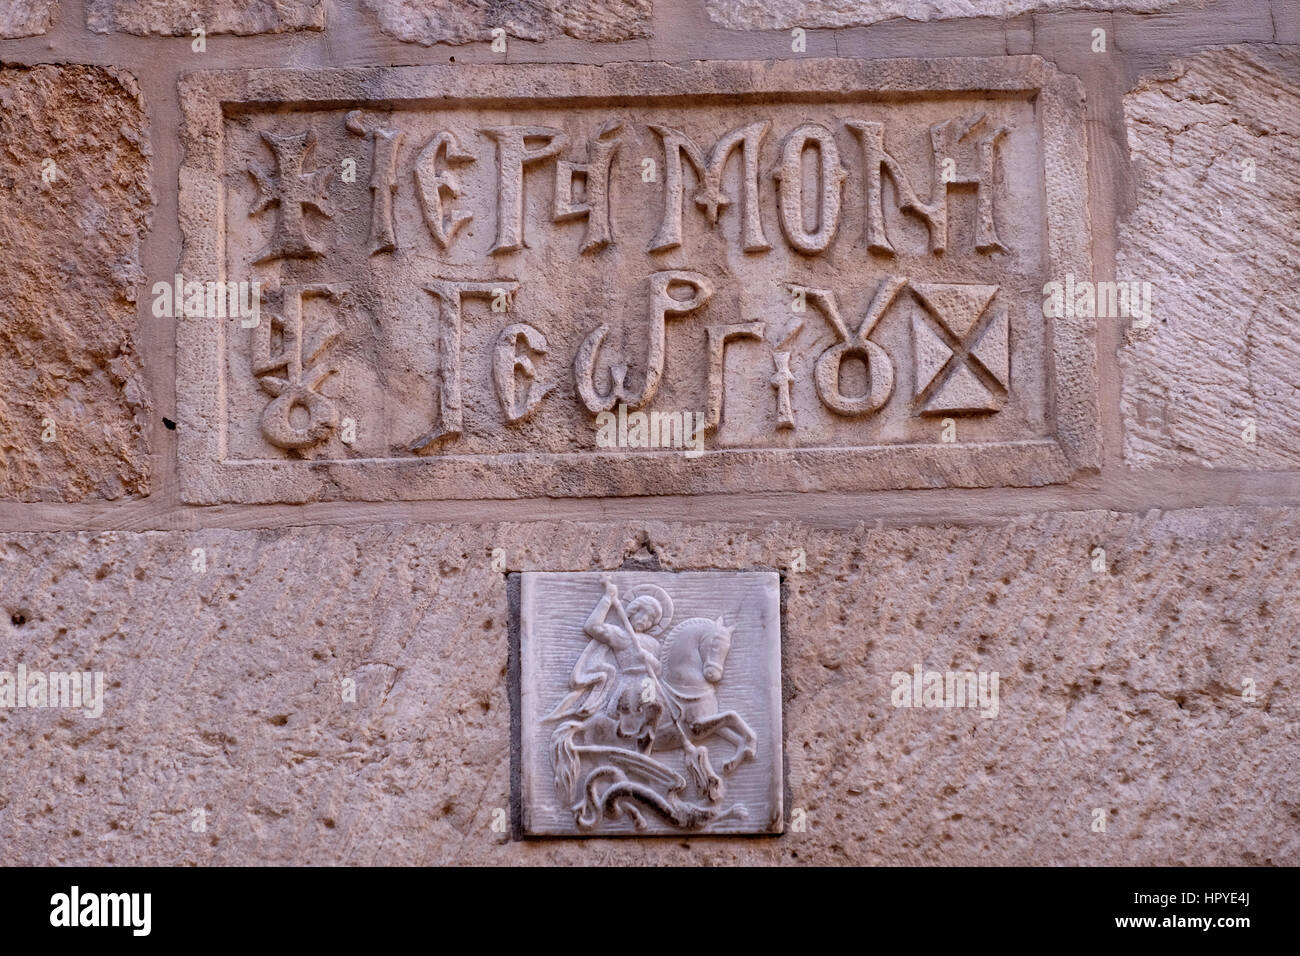 A carved figure depicting an orthodox Christian legend in which Saint George slays a dragon that demanded human sacrifices at entrance to the St. George Monastery in St Francis street in the Christian Quarter old city East Jerusalem Israel Stock Photo